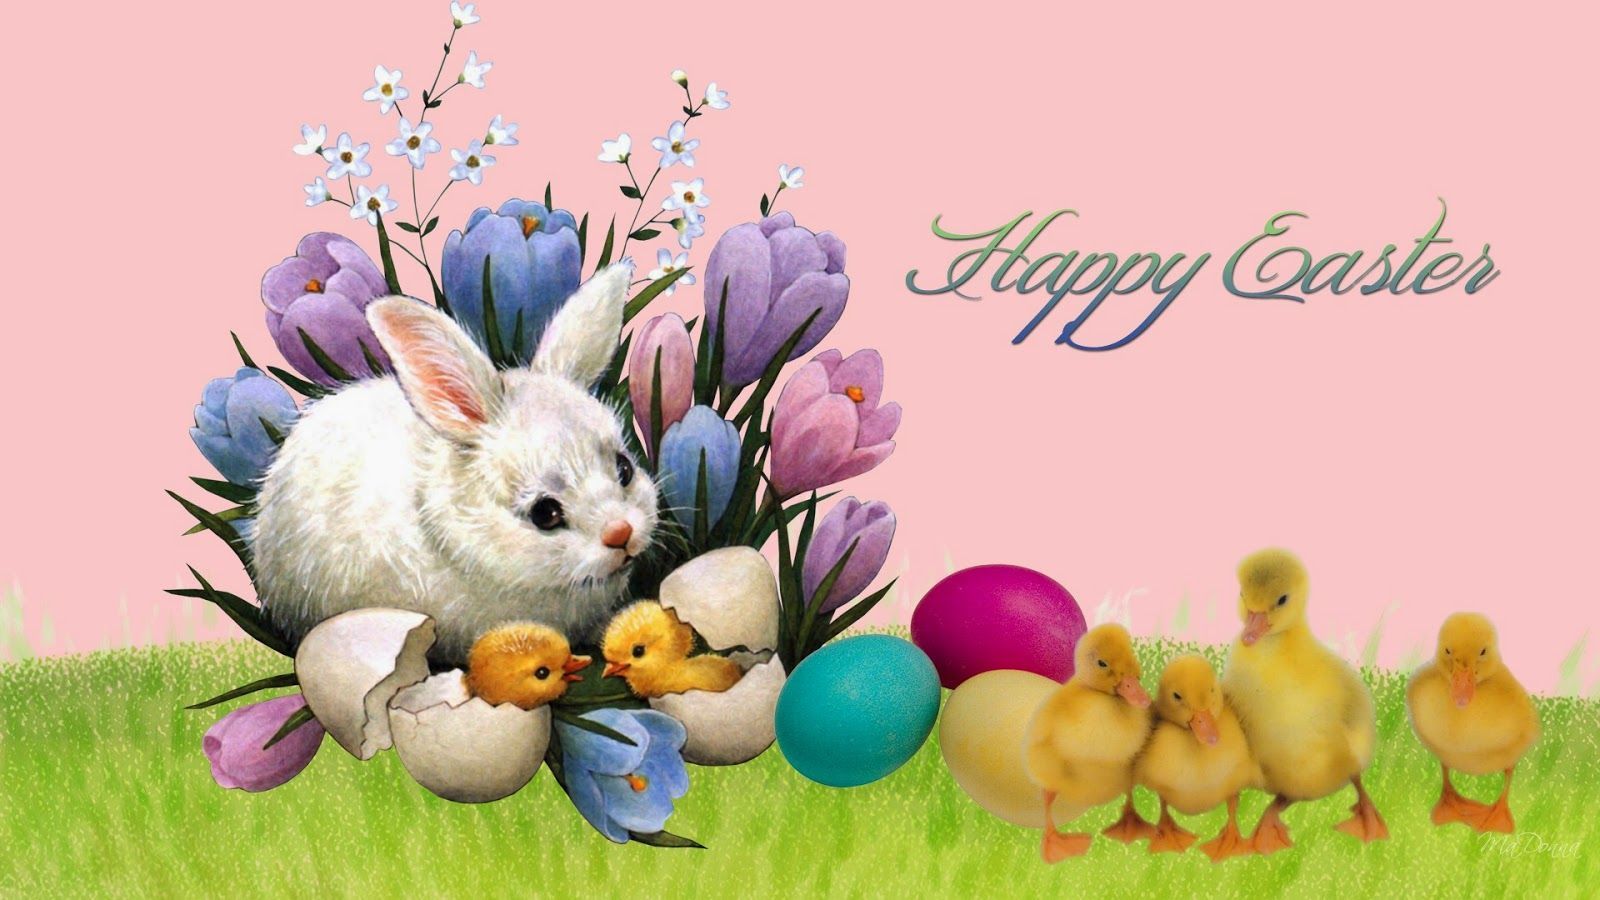 Great Collection of Easter HD Wallpapers, easter quotes, Easter